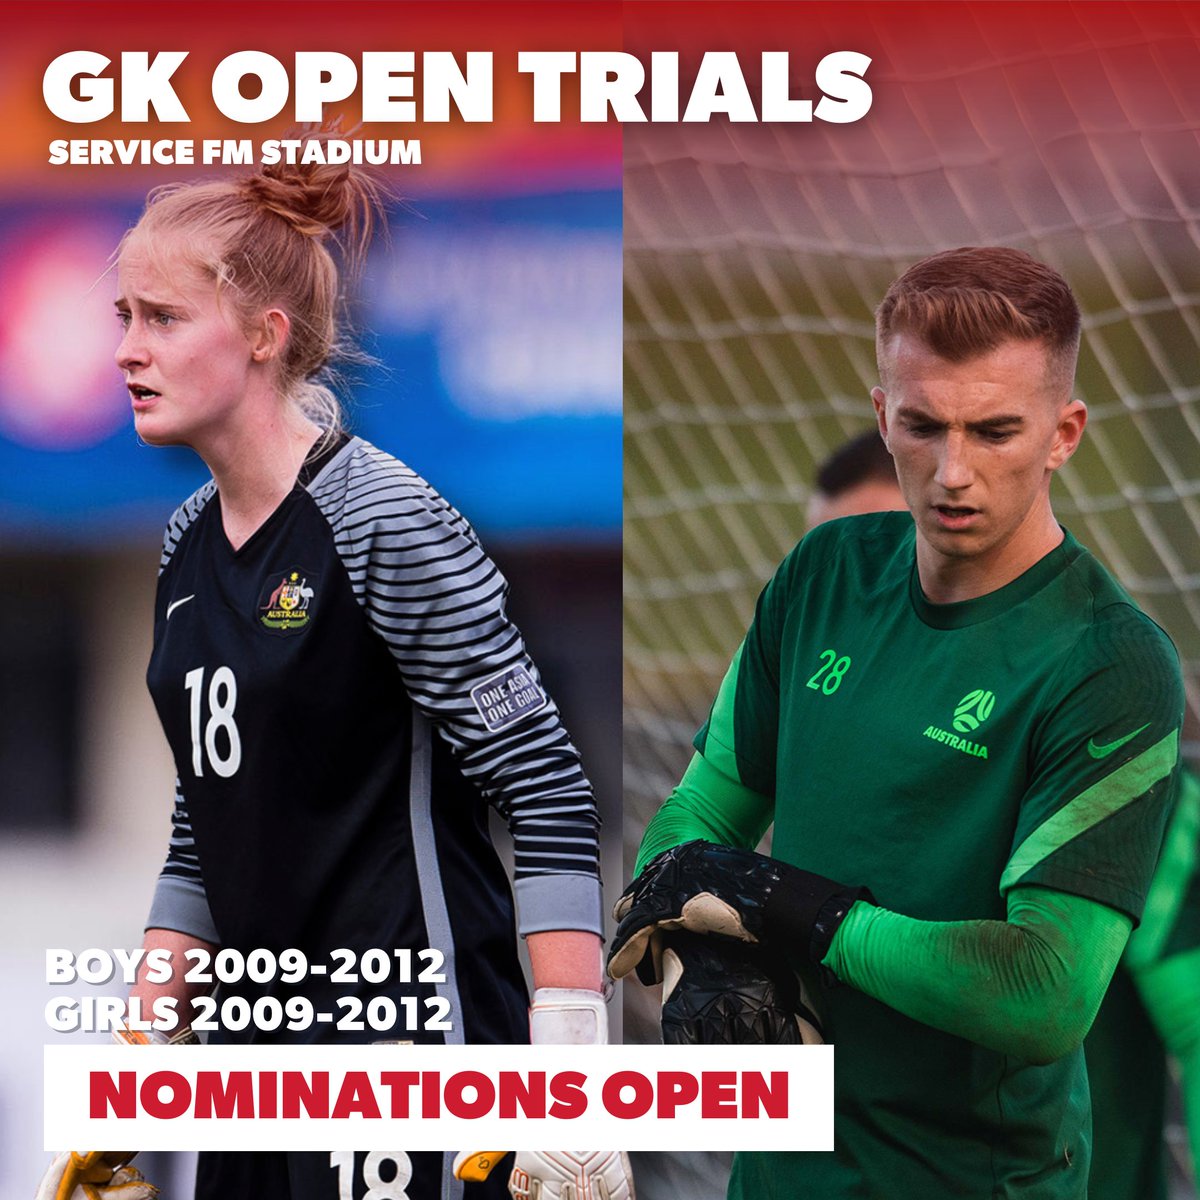 GK Open trials – 2025 full time and development programs No registration required – please arrive 15mins prior; Boys 2012 and 2011 born 1-2pm June 15th Boys 2010 and 2009 born 2-3pm June 15th Girls 2012 and 2011 born 1-2pm June 22nd Girls 2010 and 2009 born 2-3pm June 22nd